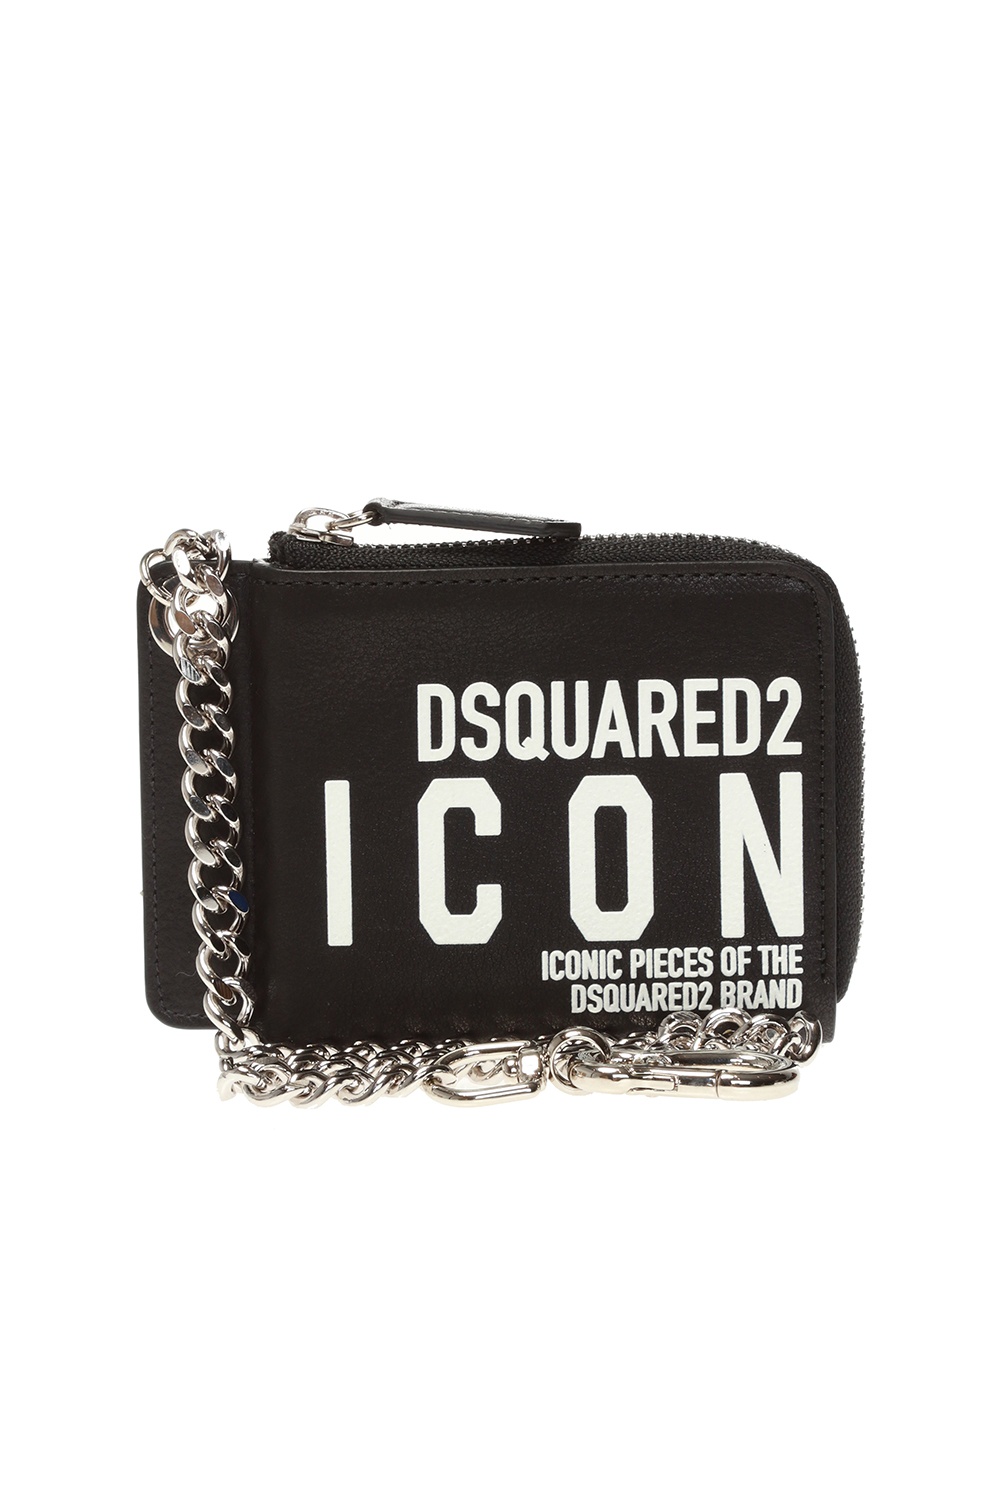 Dsquared2 Leather wallt